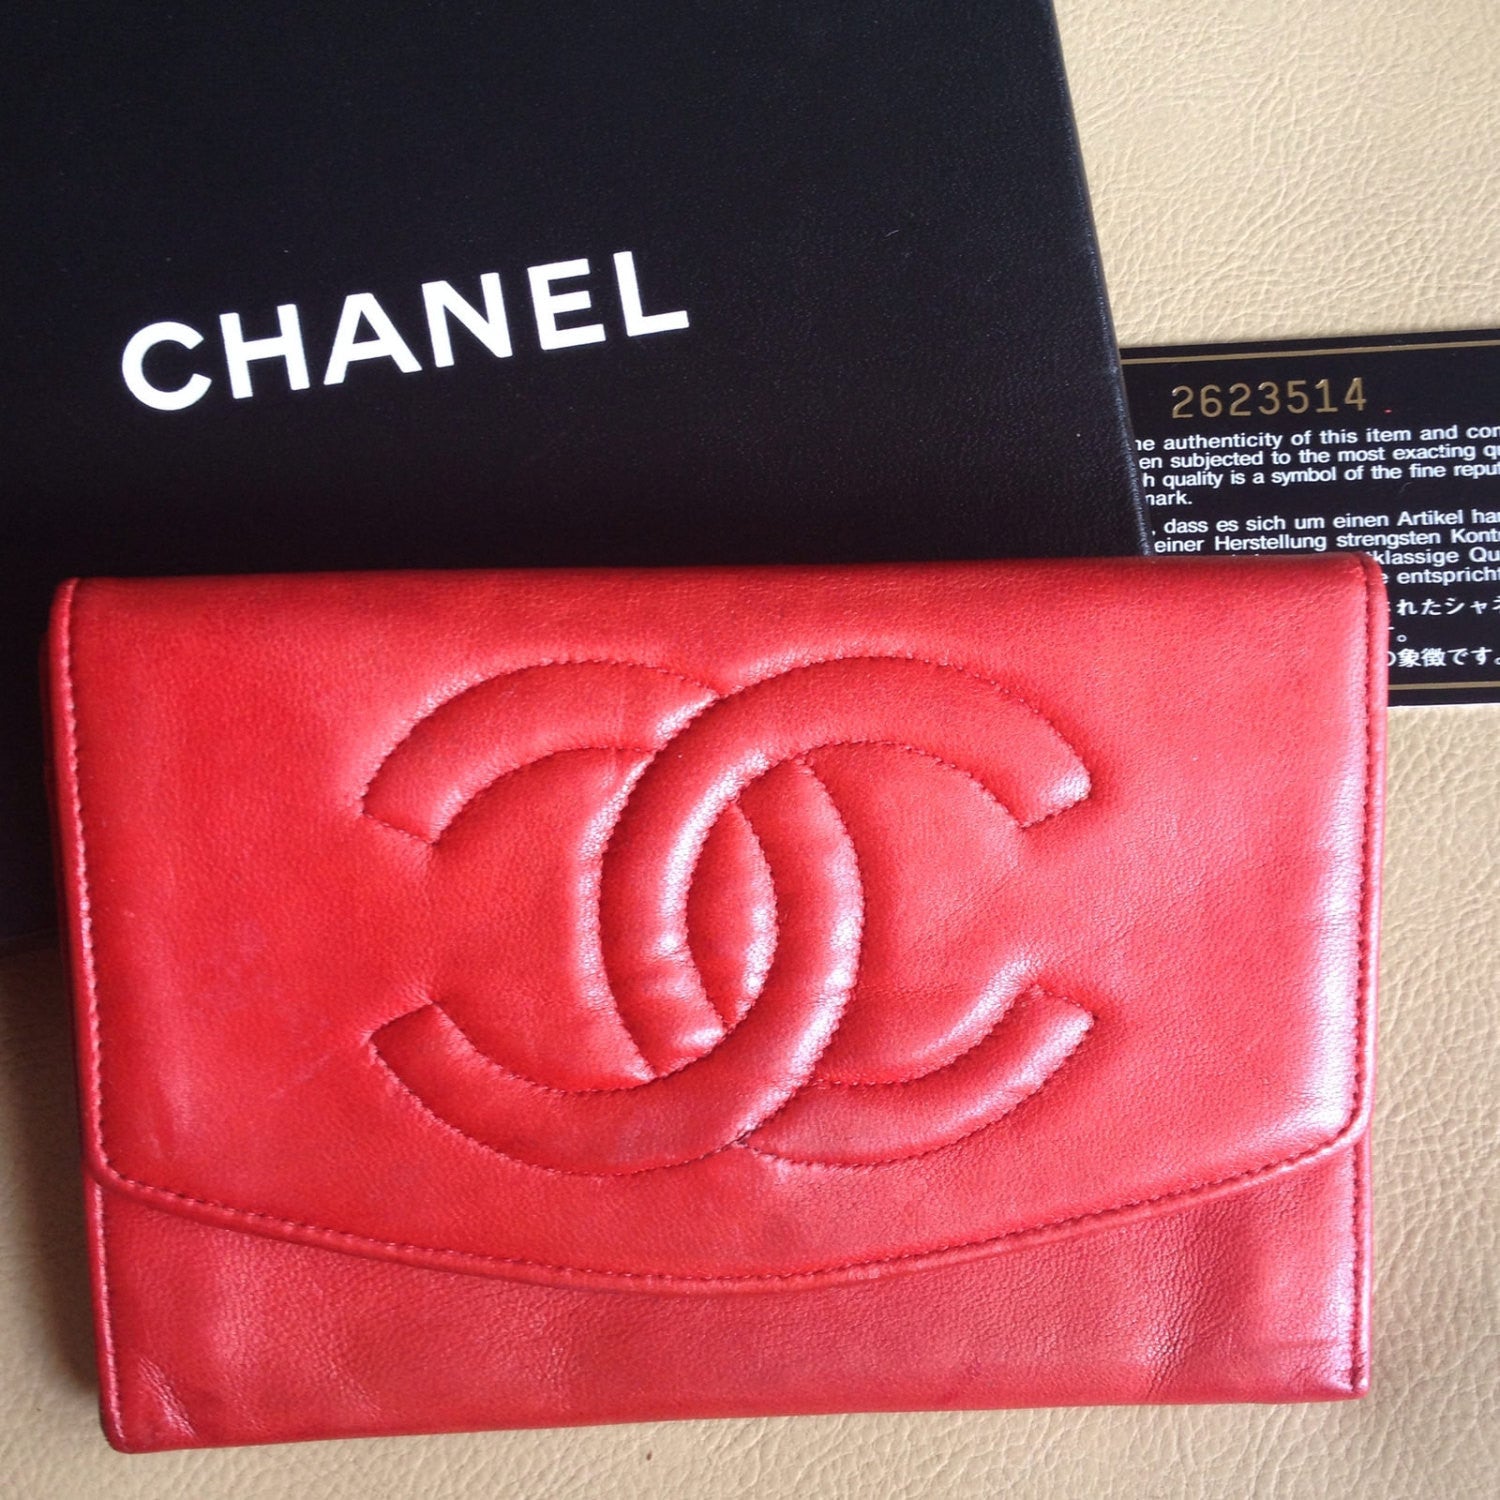 Vintage CHANEL classic leather wallet purse, card case in red